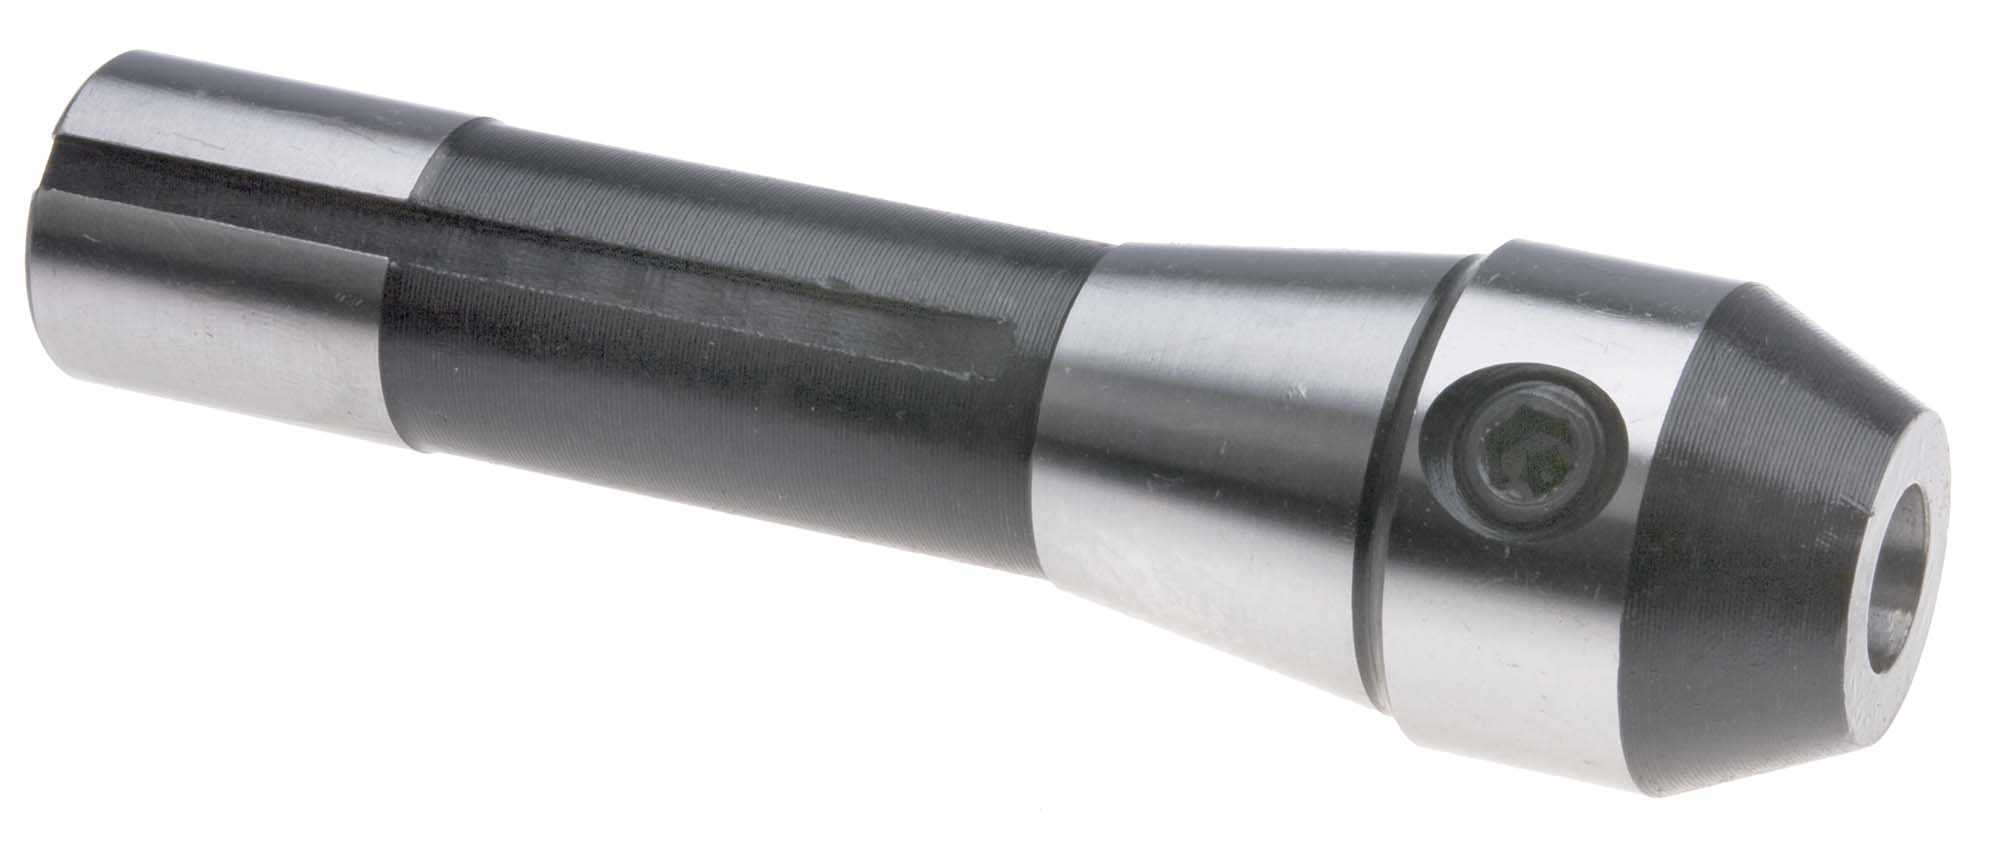 1/2" R8 End Mill Adapter